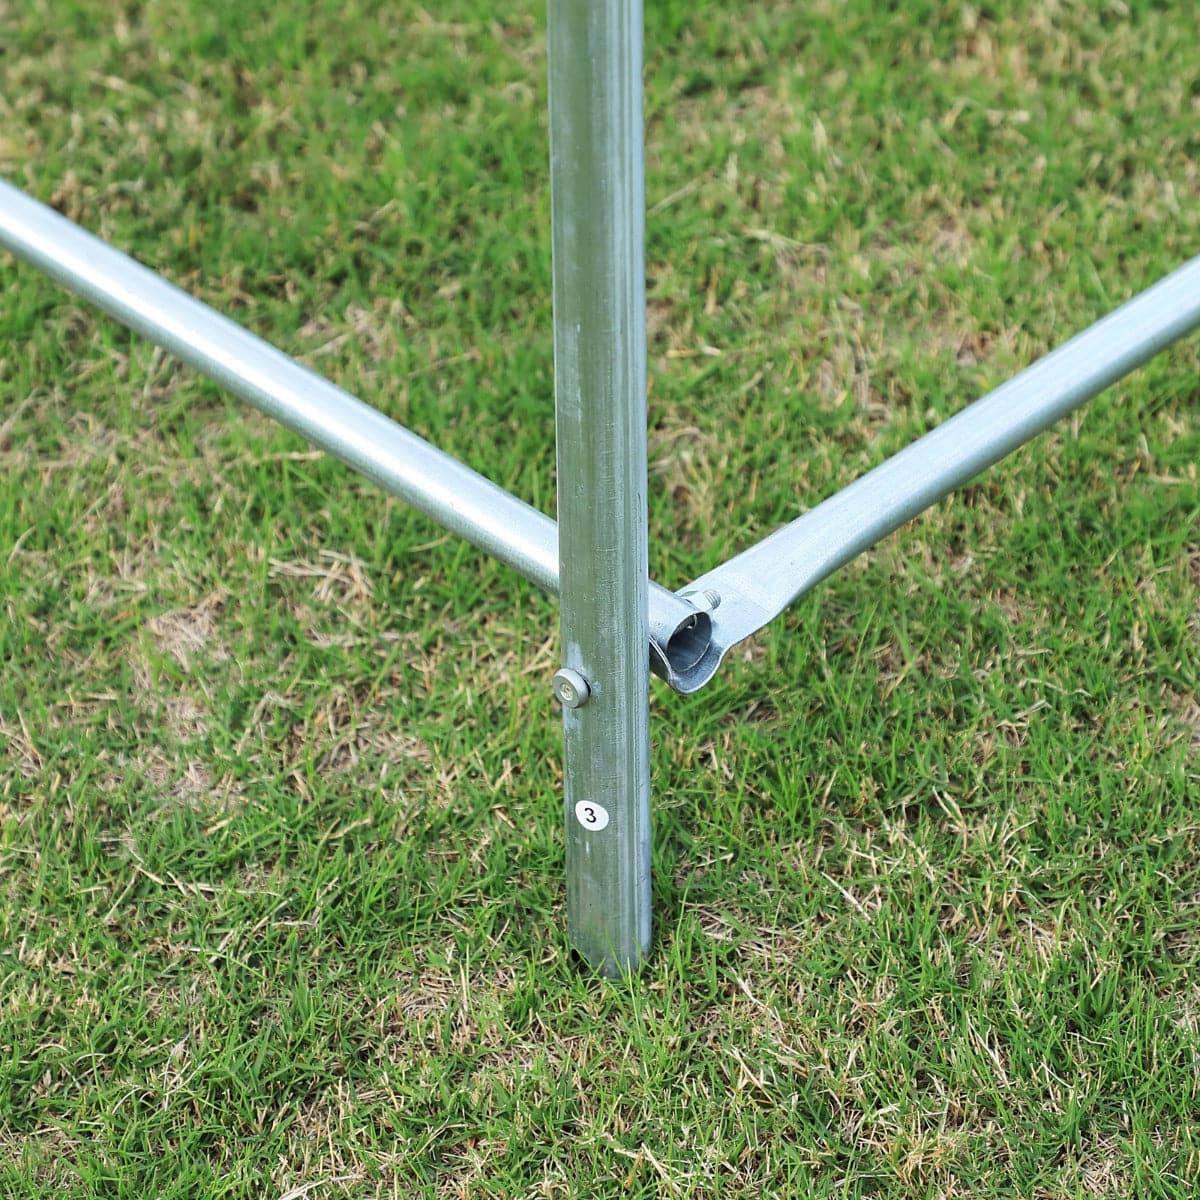 A close up of a metal pole standing on grass near an Aosom Outsunny 20&#39; x 10&#39; x 7&#39; Deluxe High Tunnel Walk-in Garden Greenhouse Kit - White.